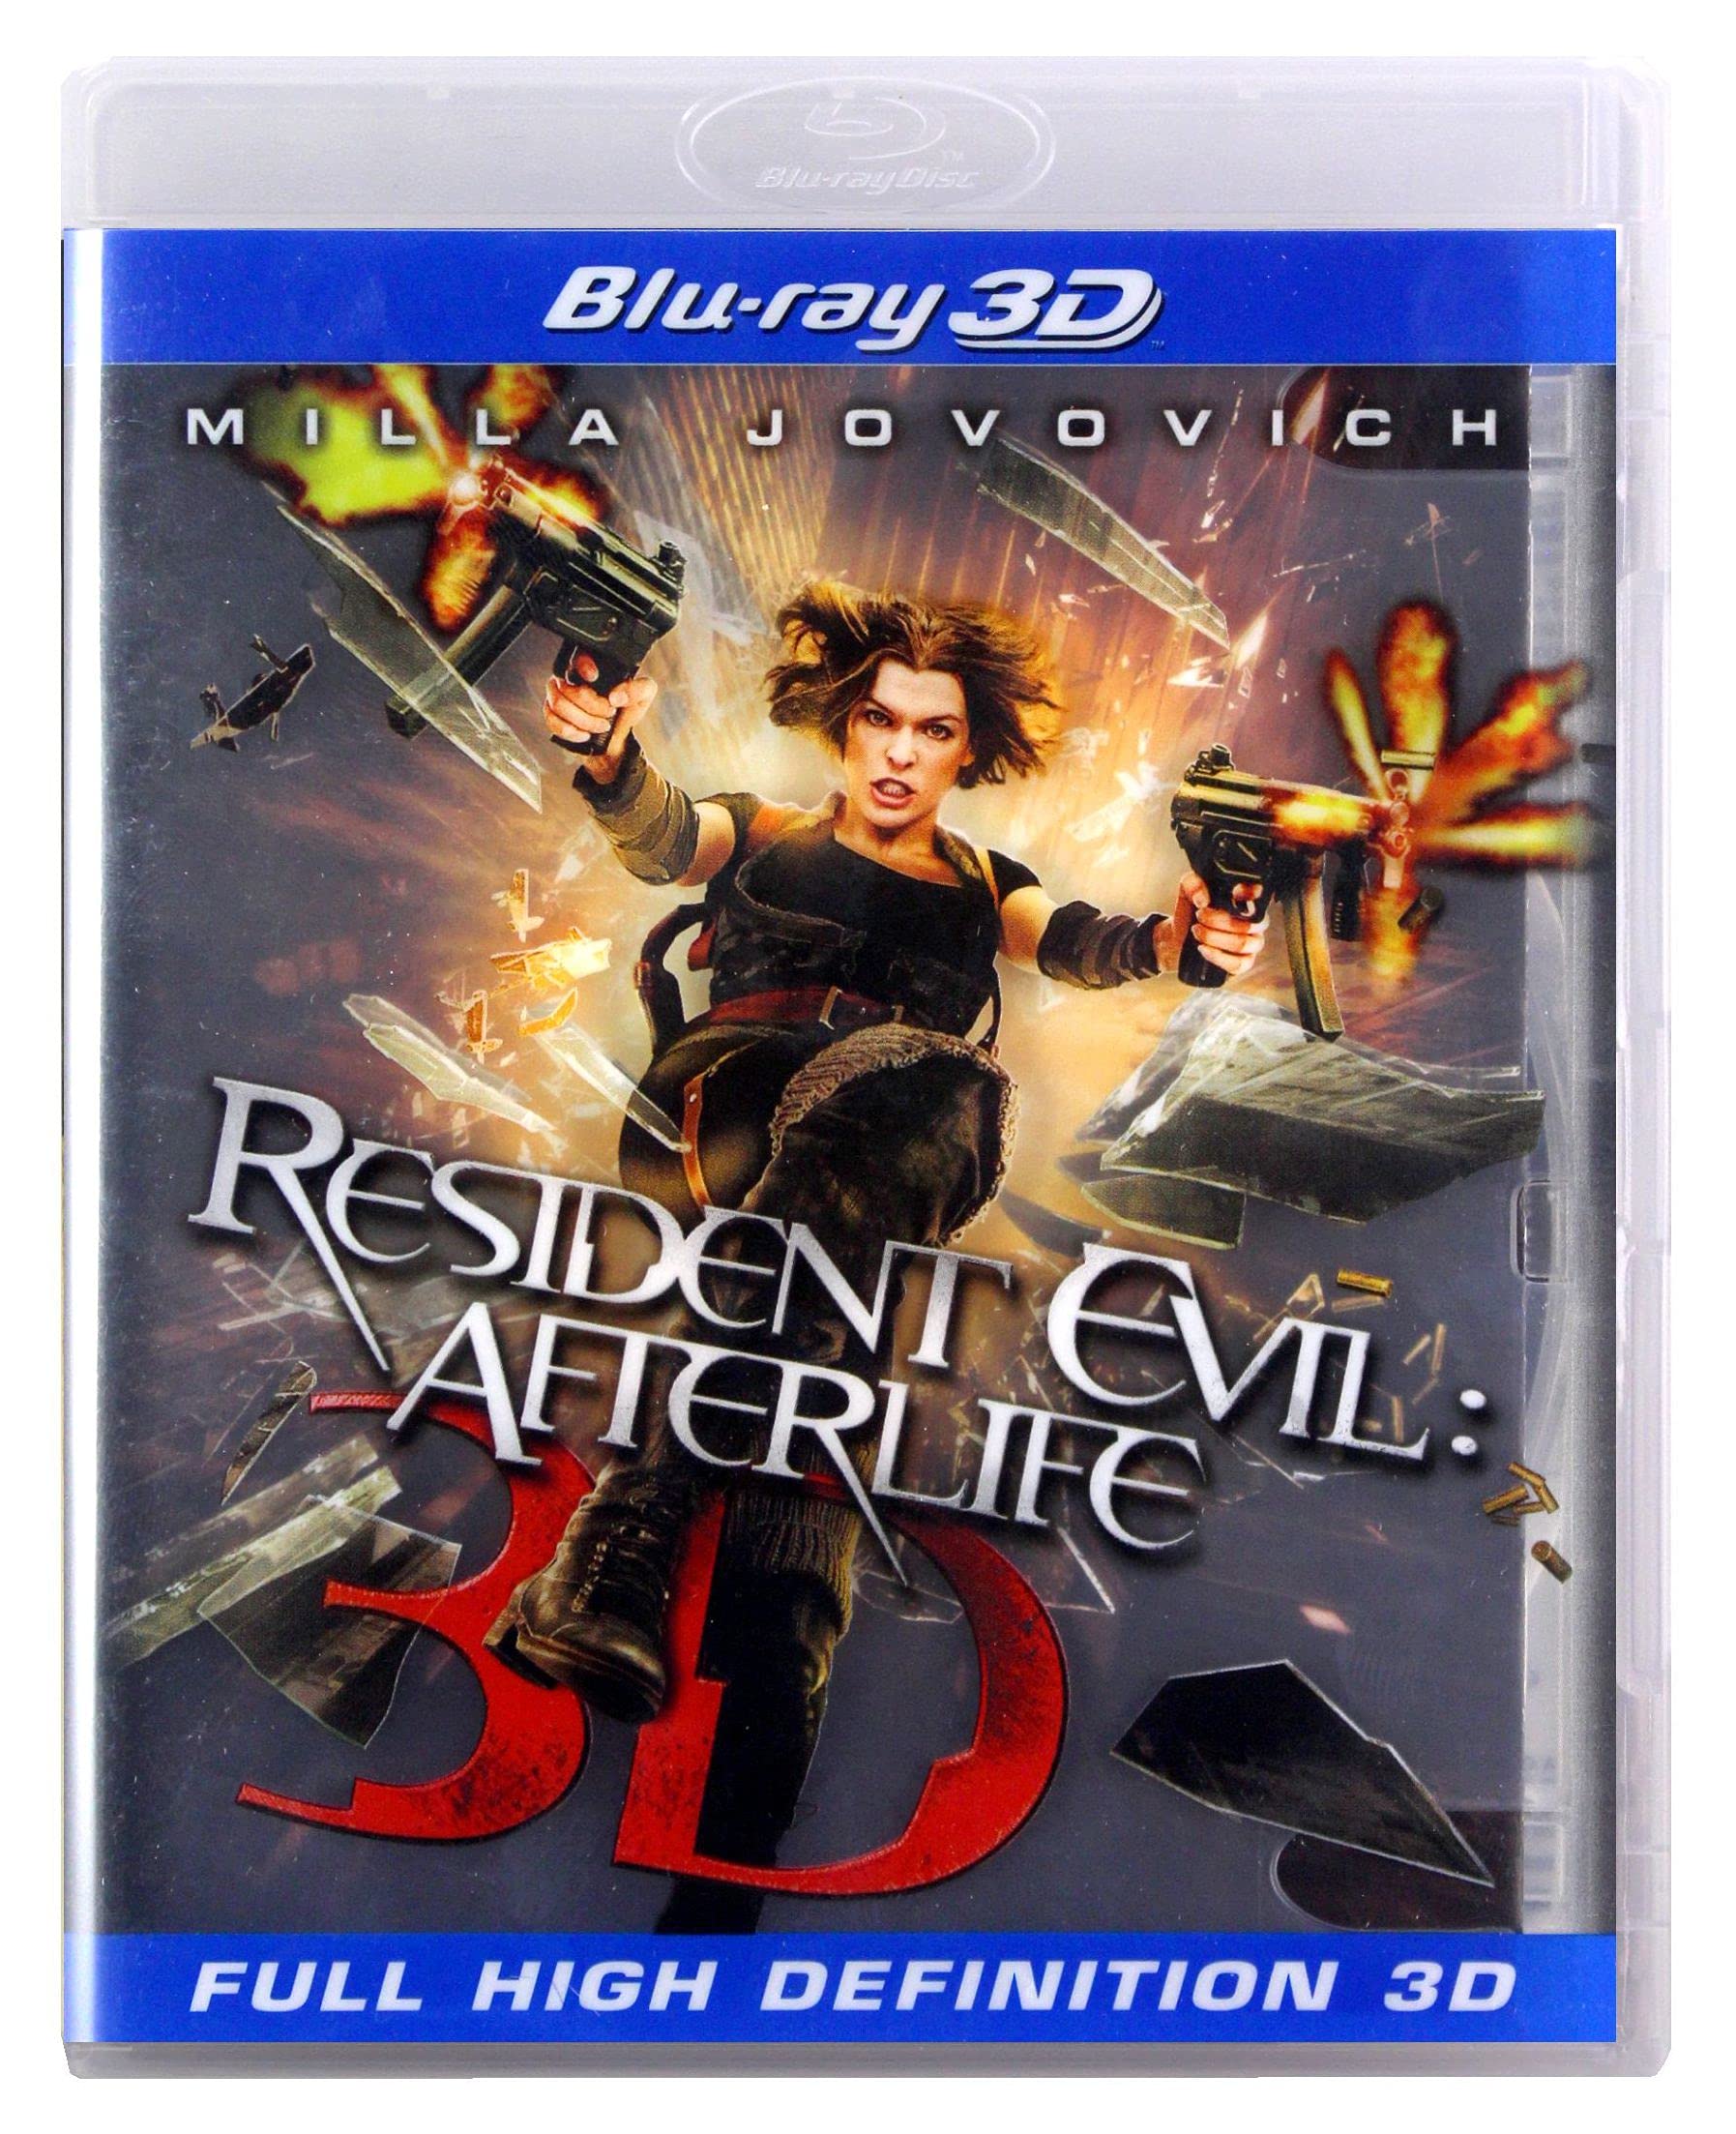 Resident Evil: Afterlife [Blu-ray 3D] (Bilingual) [Import] on MovieShack